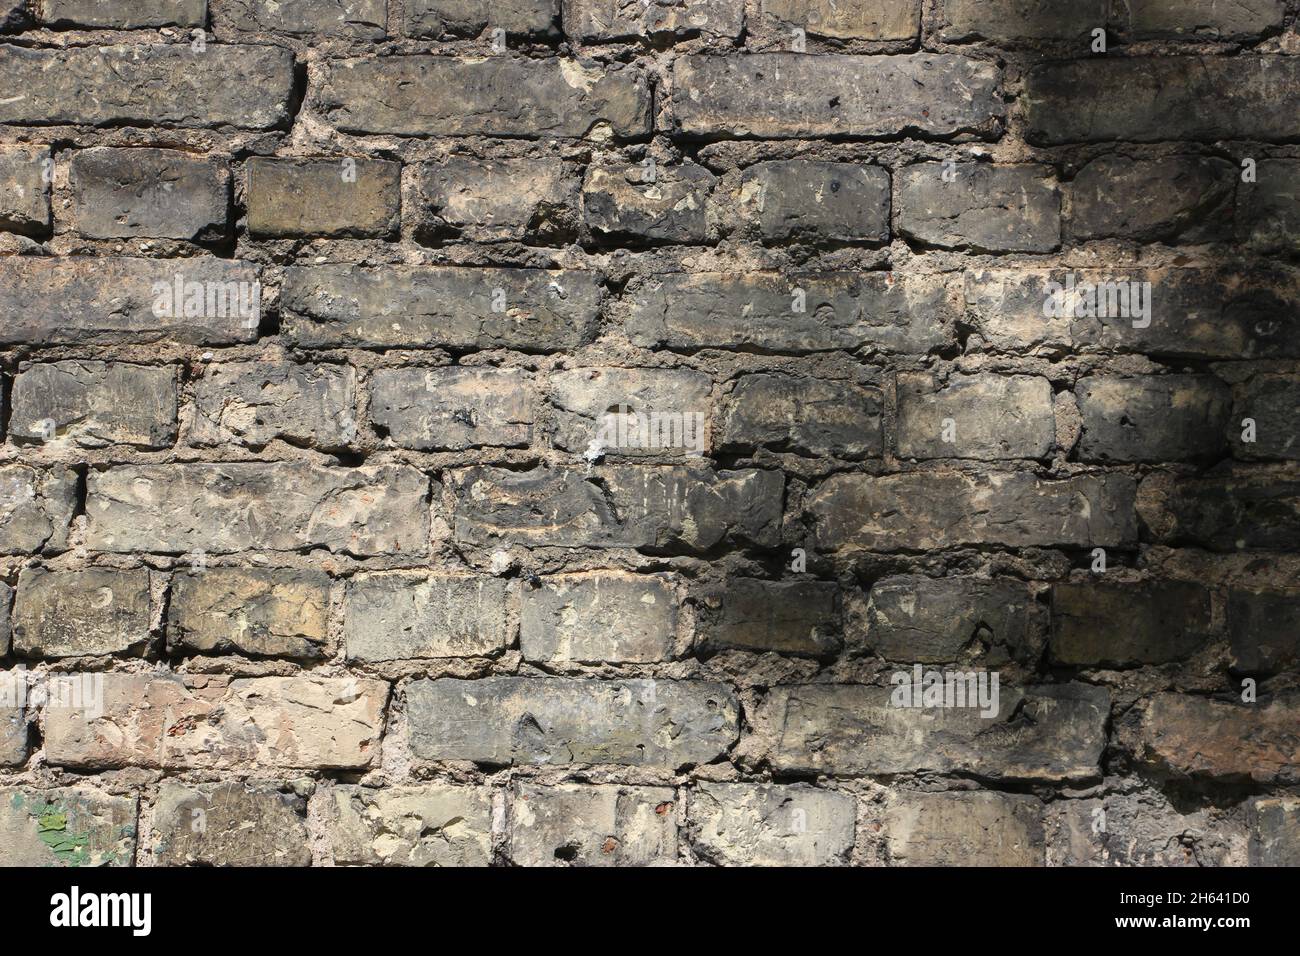 Background of old vintage dirty brick wall with peeling plaster, texture. Stock Photo